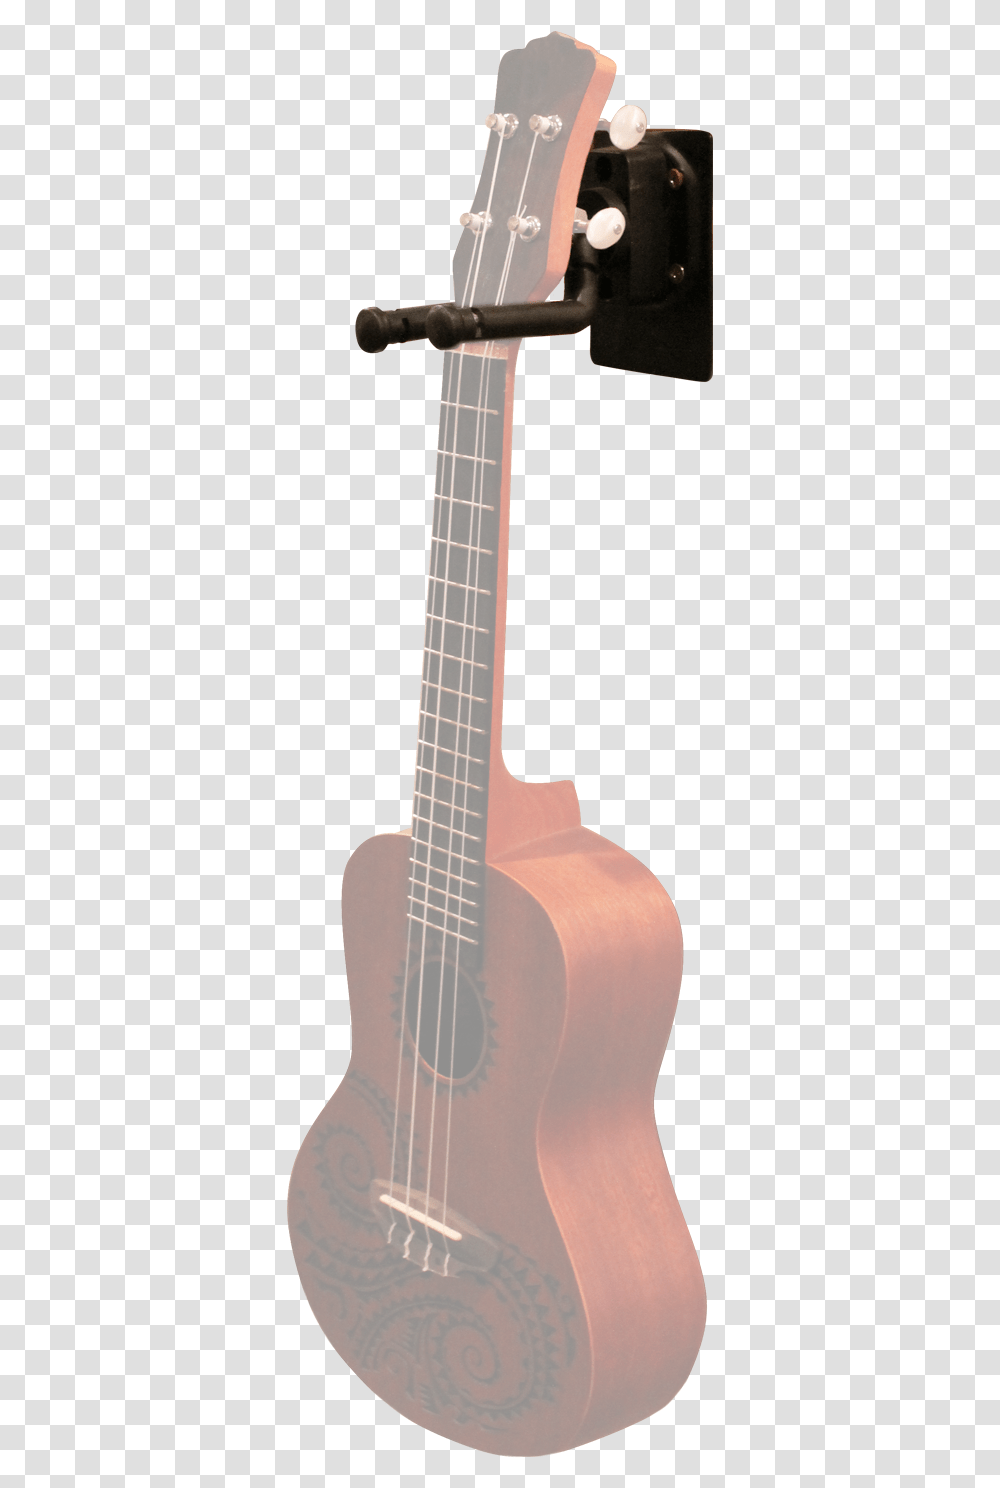 Violin Bow Acoustic Guitar, Leisure Activities, Musical Instrument, Bass Guitar, Lute Transparent Png